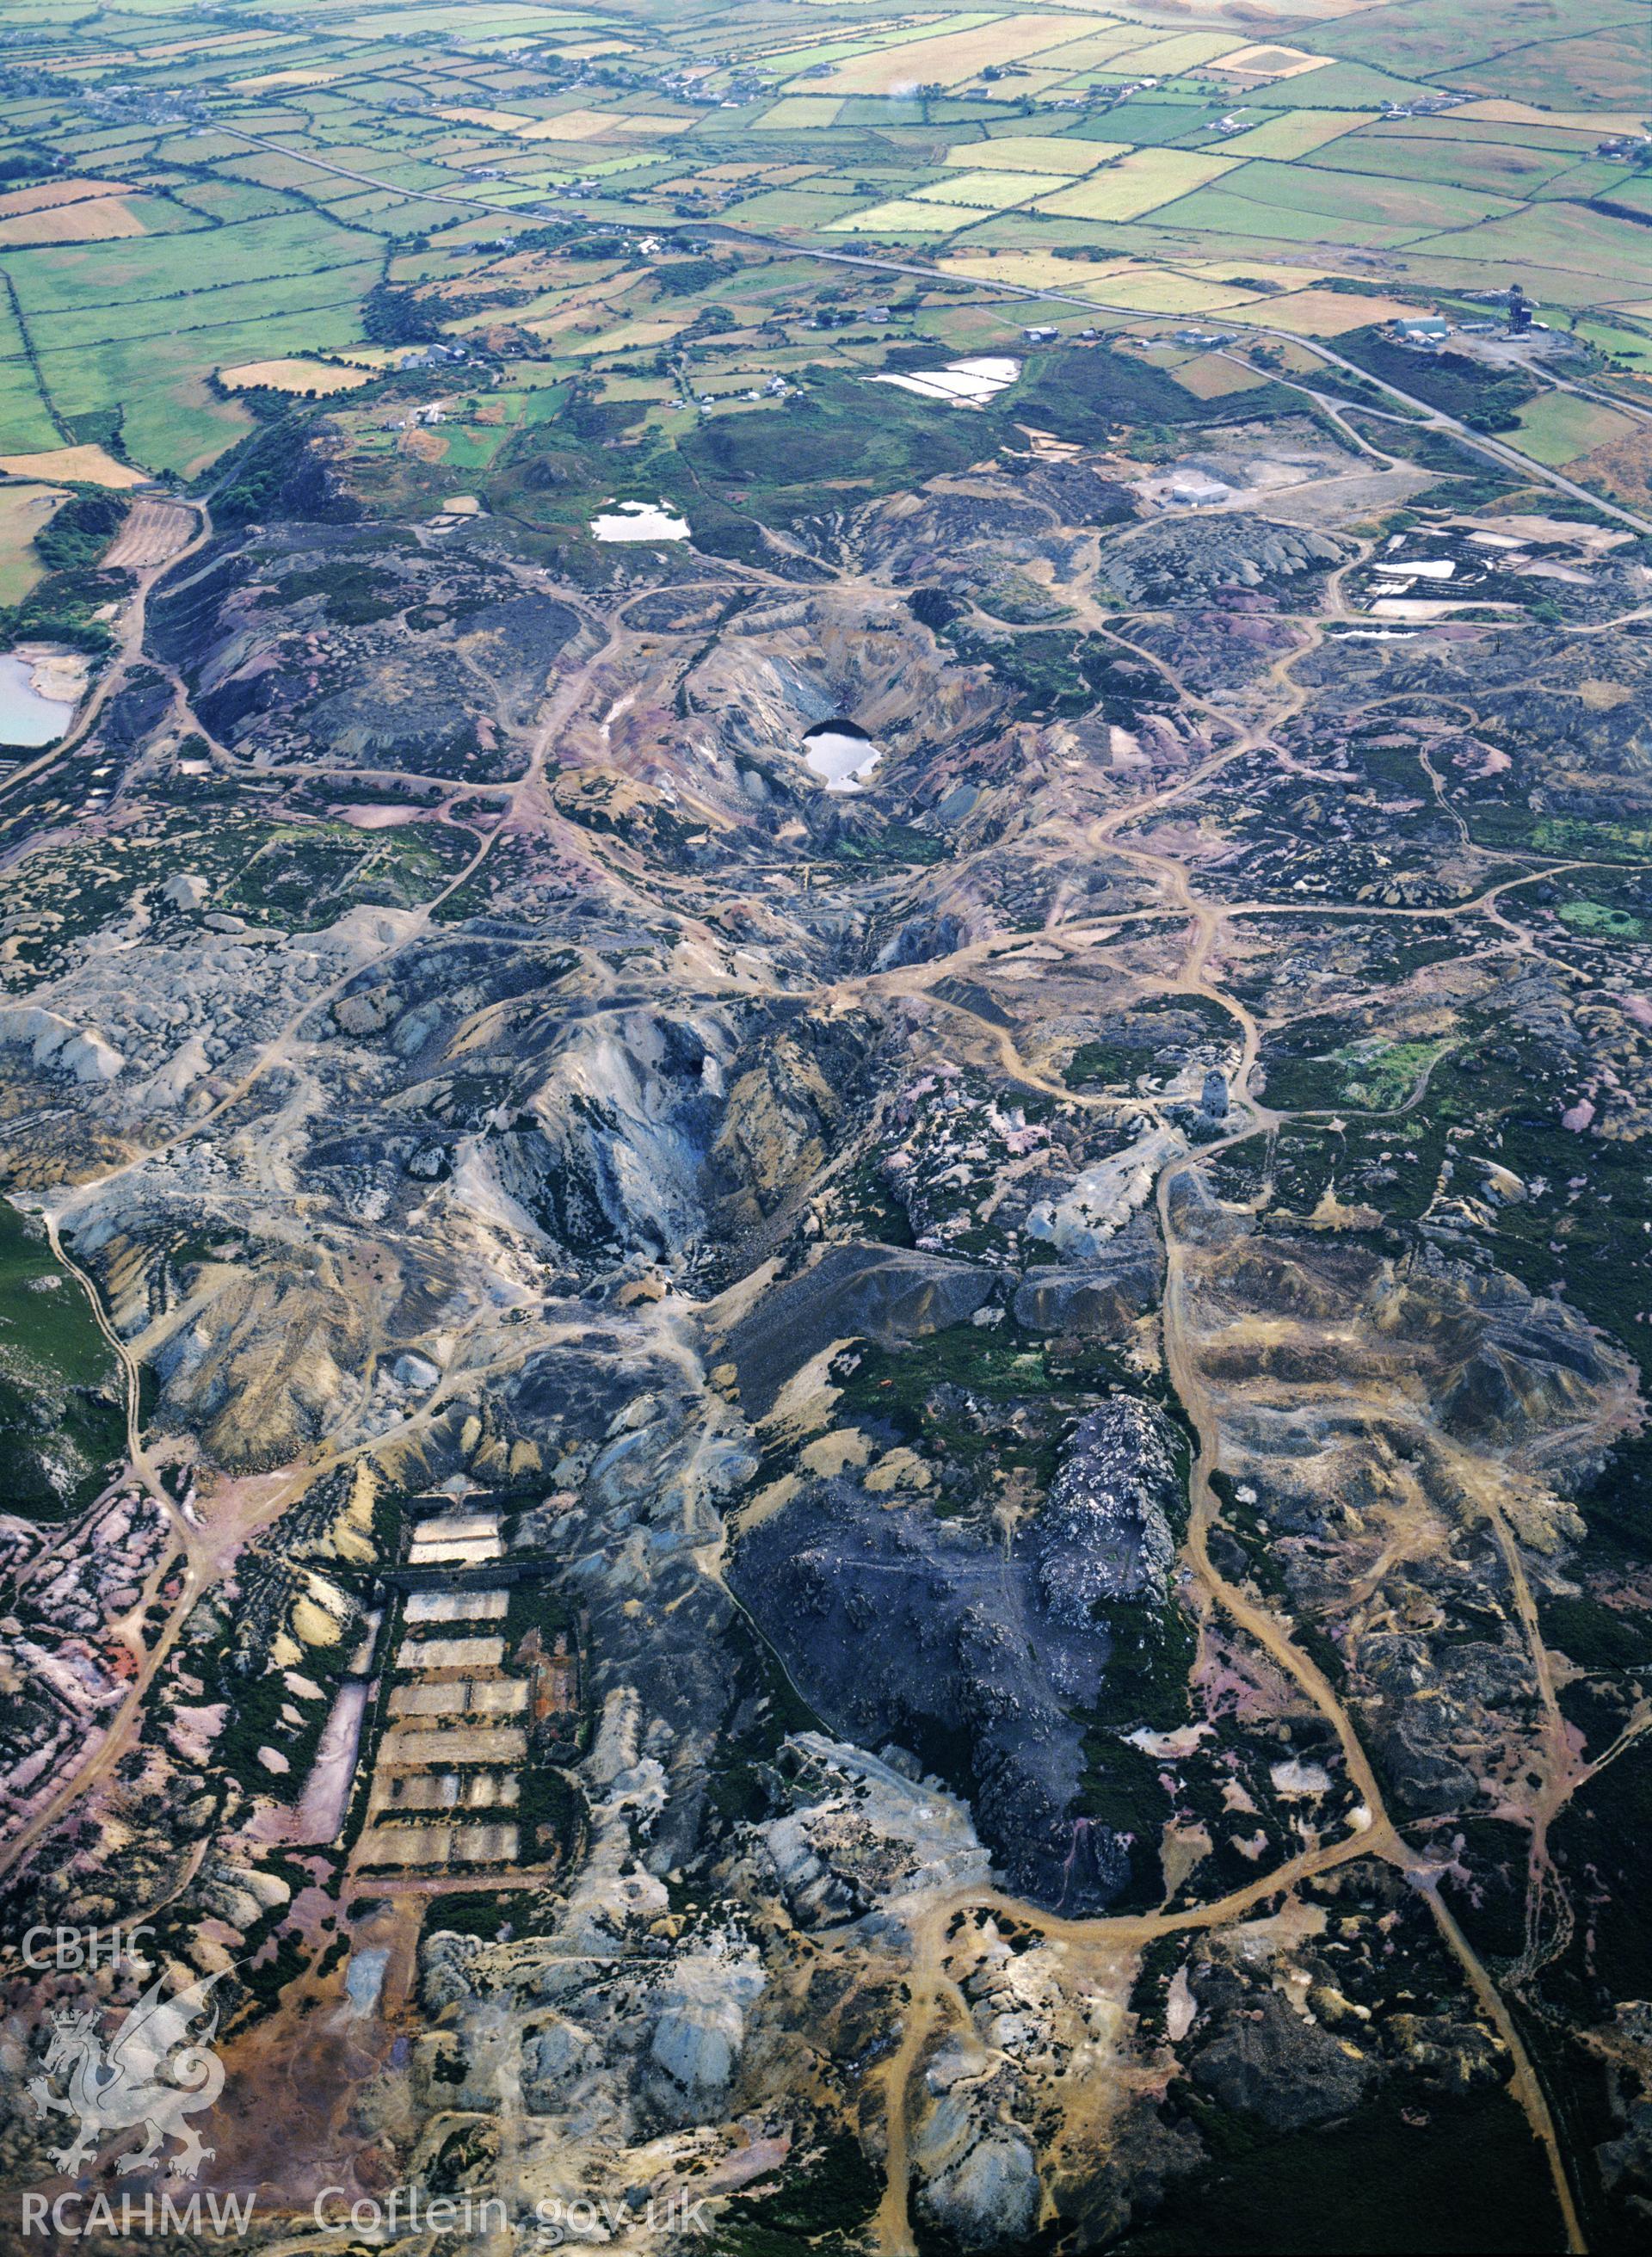 RCAHMW black and white oblique aerial photograph of Parys Mountain Copper Mines, Amlwch, taken by C R Musson, 1996.